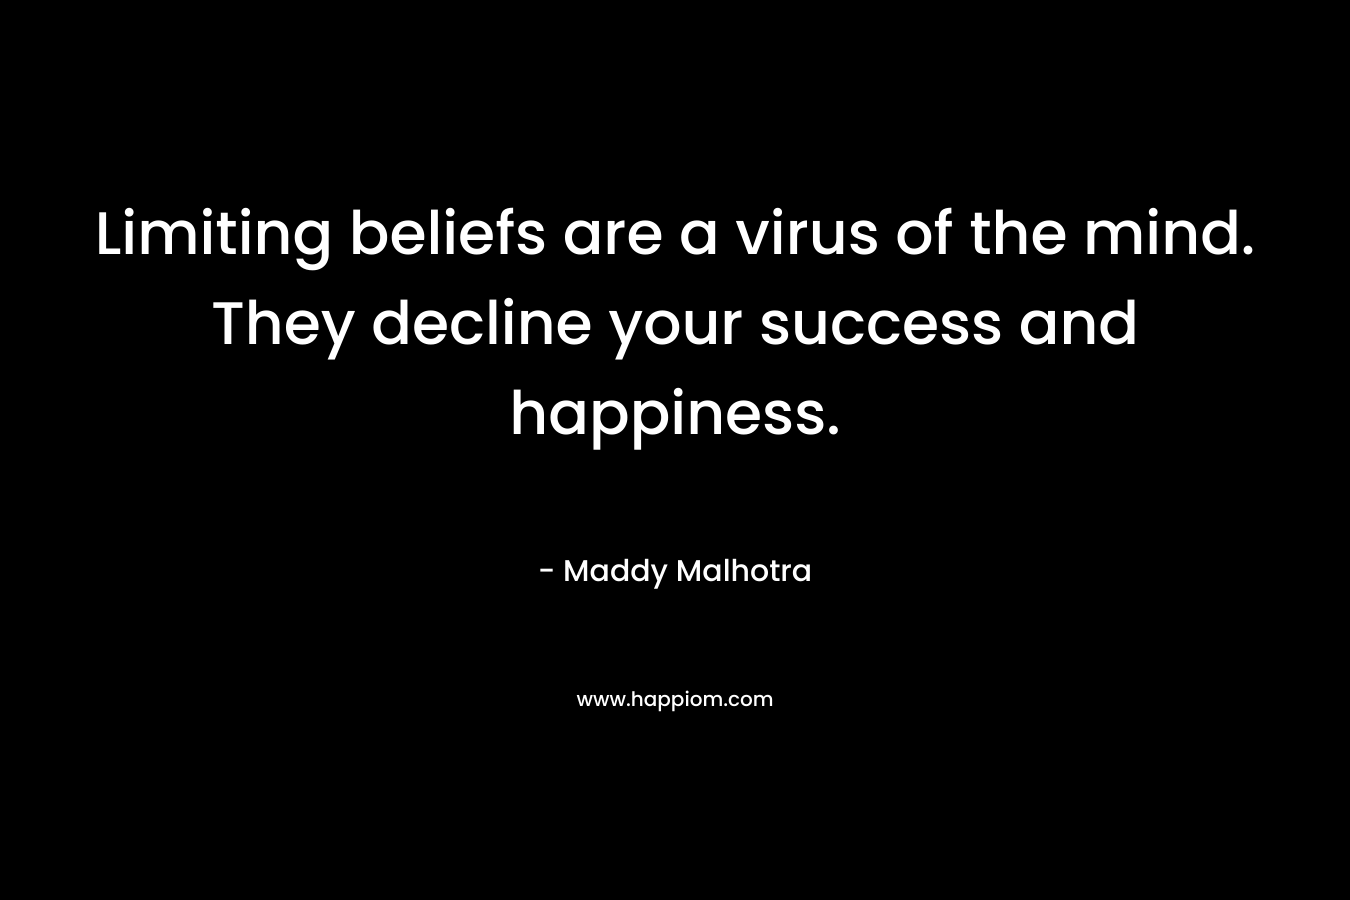 Limiting beliefs are a virus of the mind. They decline your success and happiness. – Maddy Malhotra